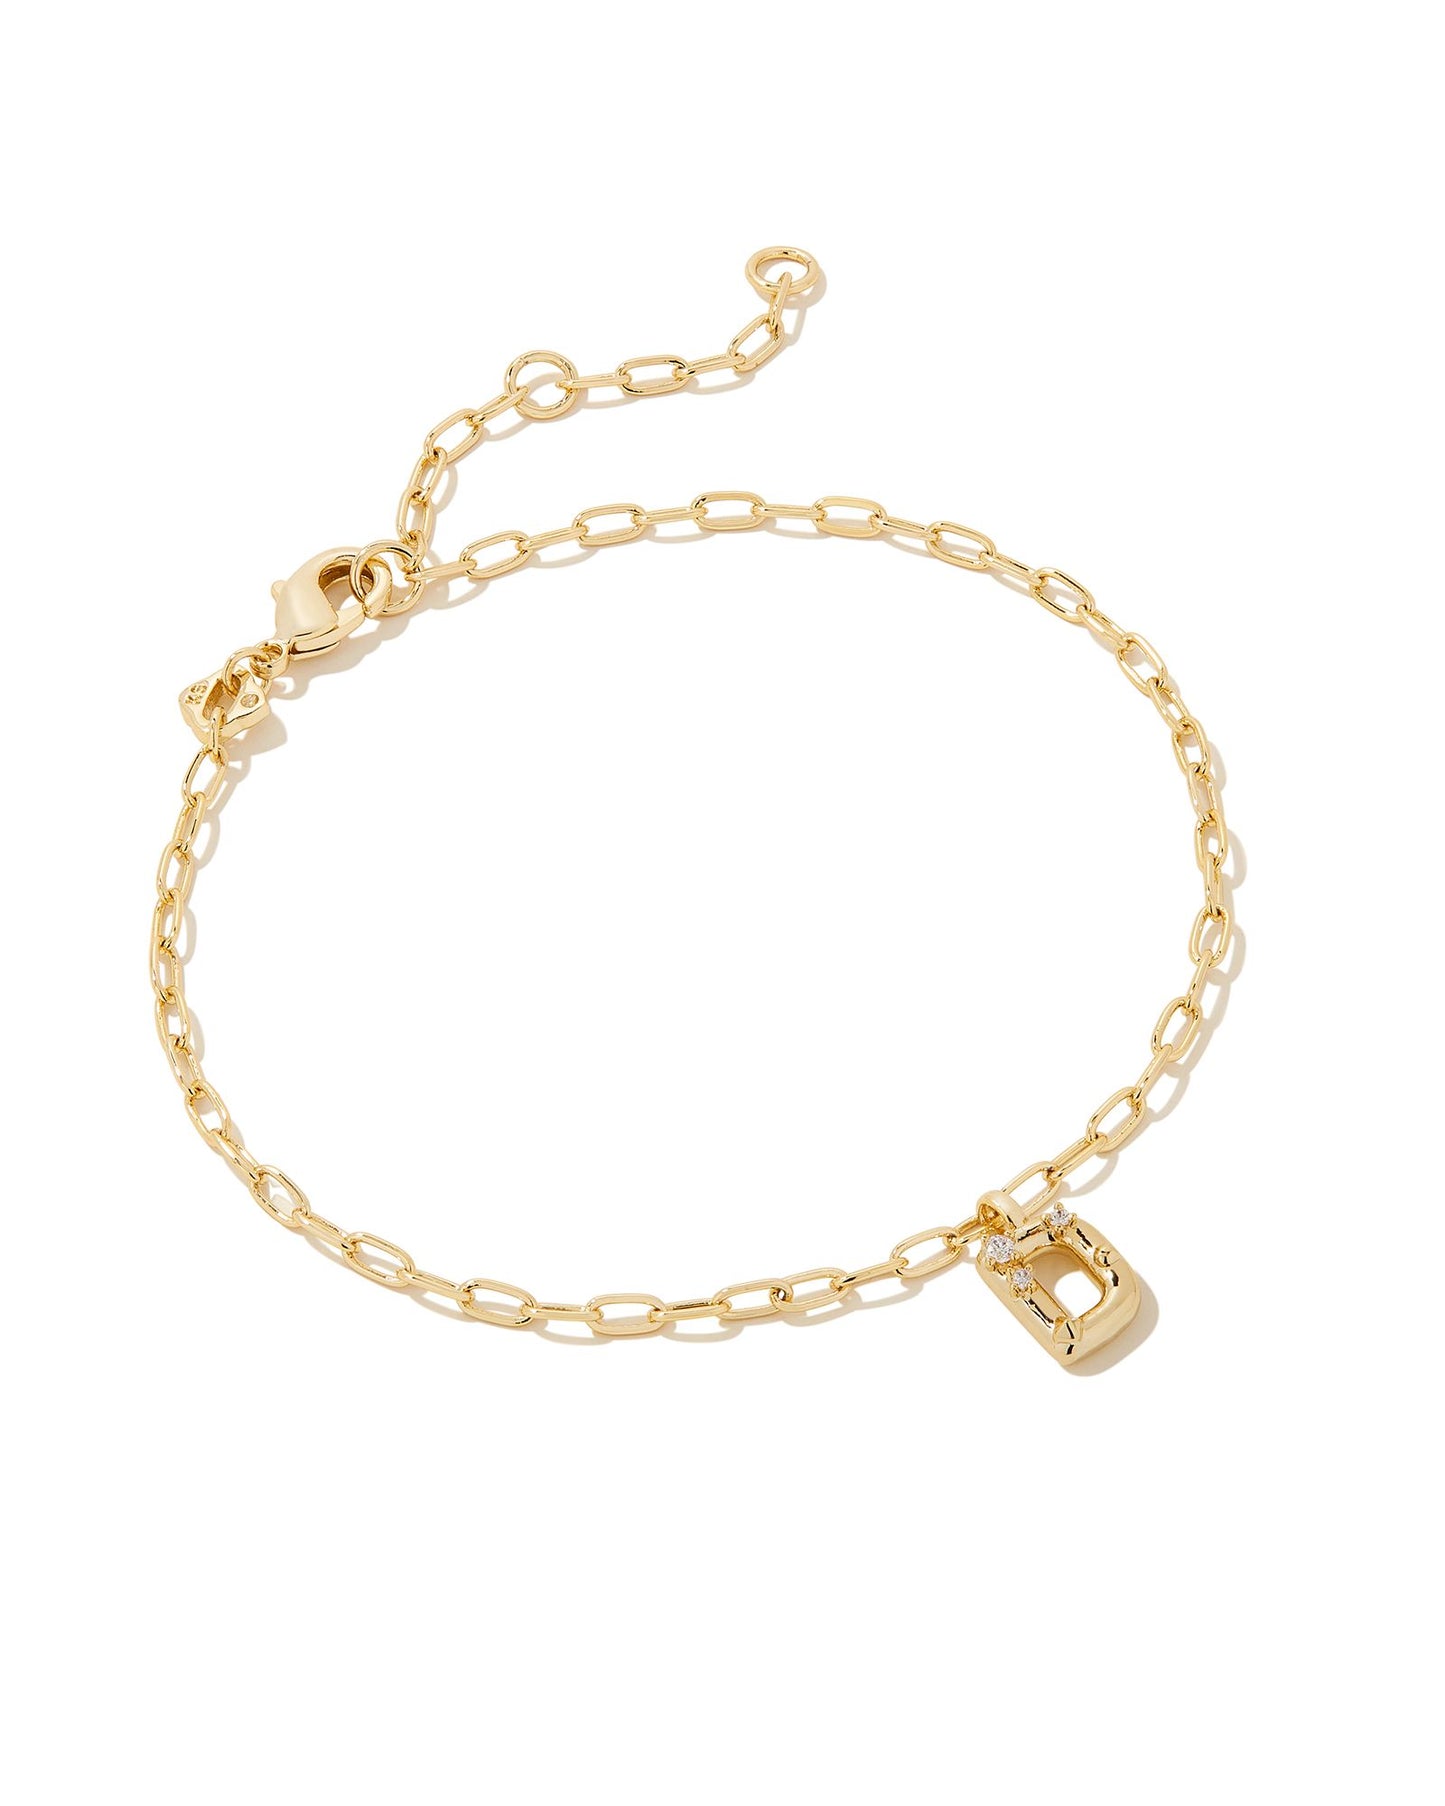 Add a personal touch to your wrist stack with the Crystal Delicate Chain Bracelet in White Crystal, our first Fashion Jewelry initial bracelet. Featuring a dainty chain and letter charm with a hint of sparkle, this bracelet is the perfect way to celebrate the ones you love—including yourself!  Dimensions- 6.5' CHAIN WITH 1.5' EXTENDER, 0.45'L X 0.26"W PENDANT Metal- 14K Gold plated over brass Closure- Lobster Clasp Material-  White CZ Letter D